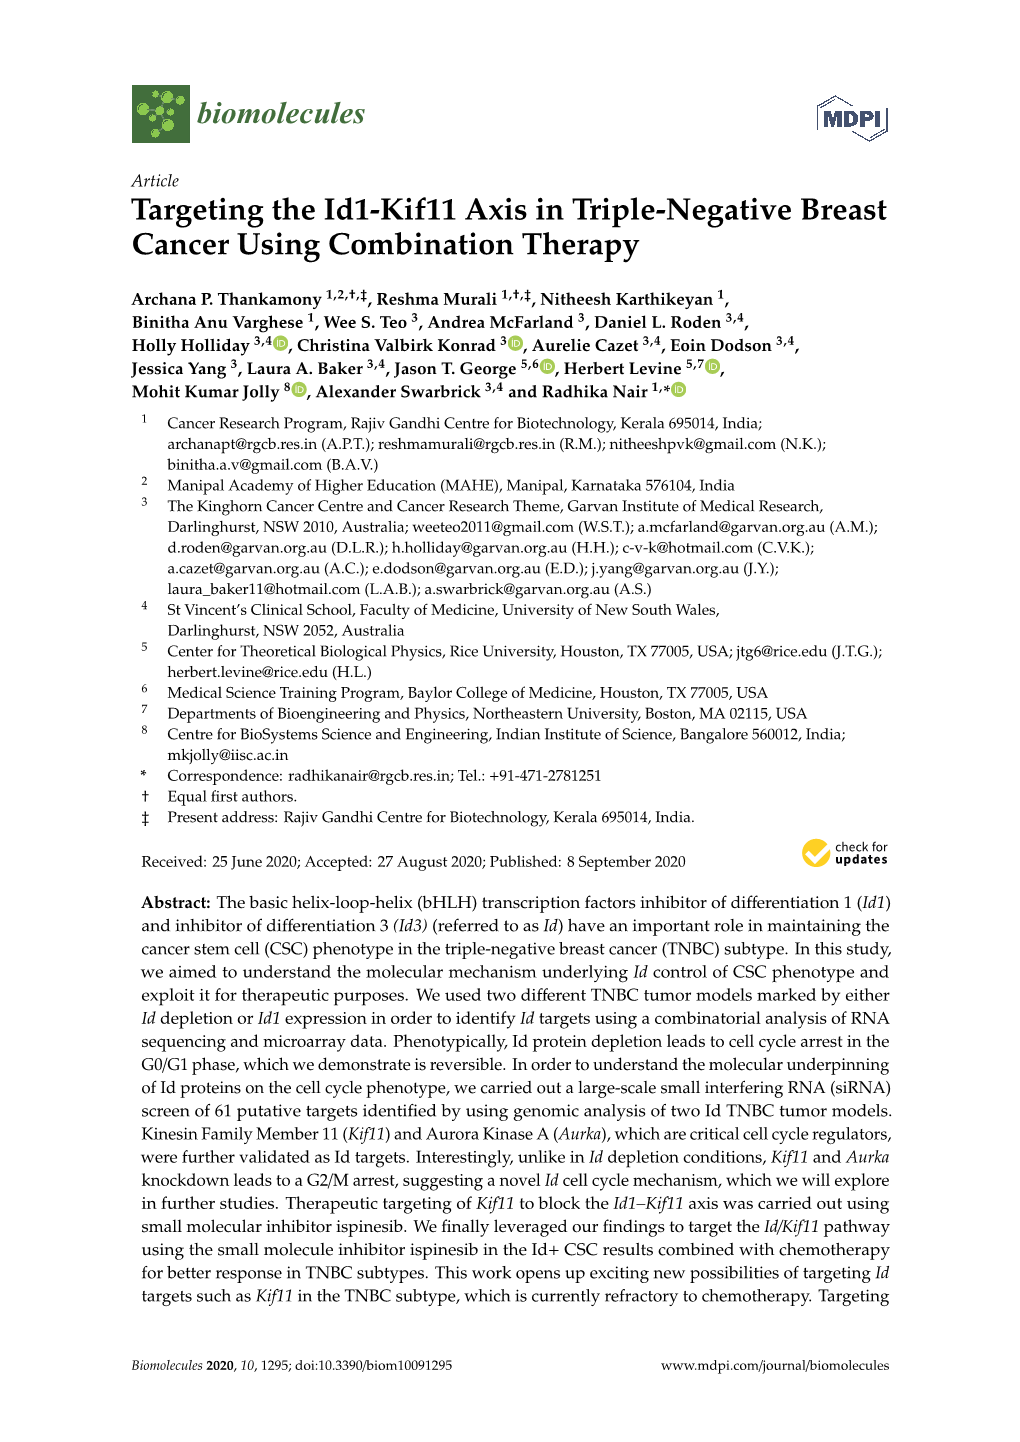 Targeting the Id1-Kif11 Axis in Triple-Negative Breast Cancer Using Combination Therapy